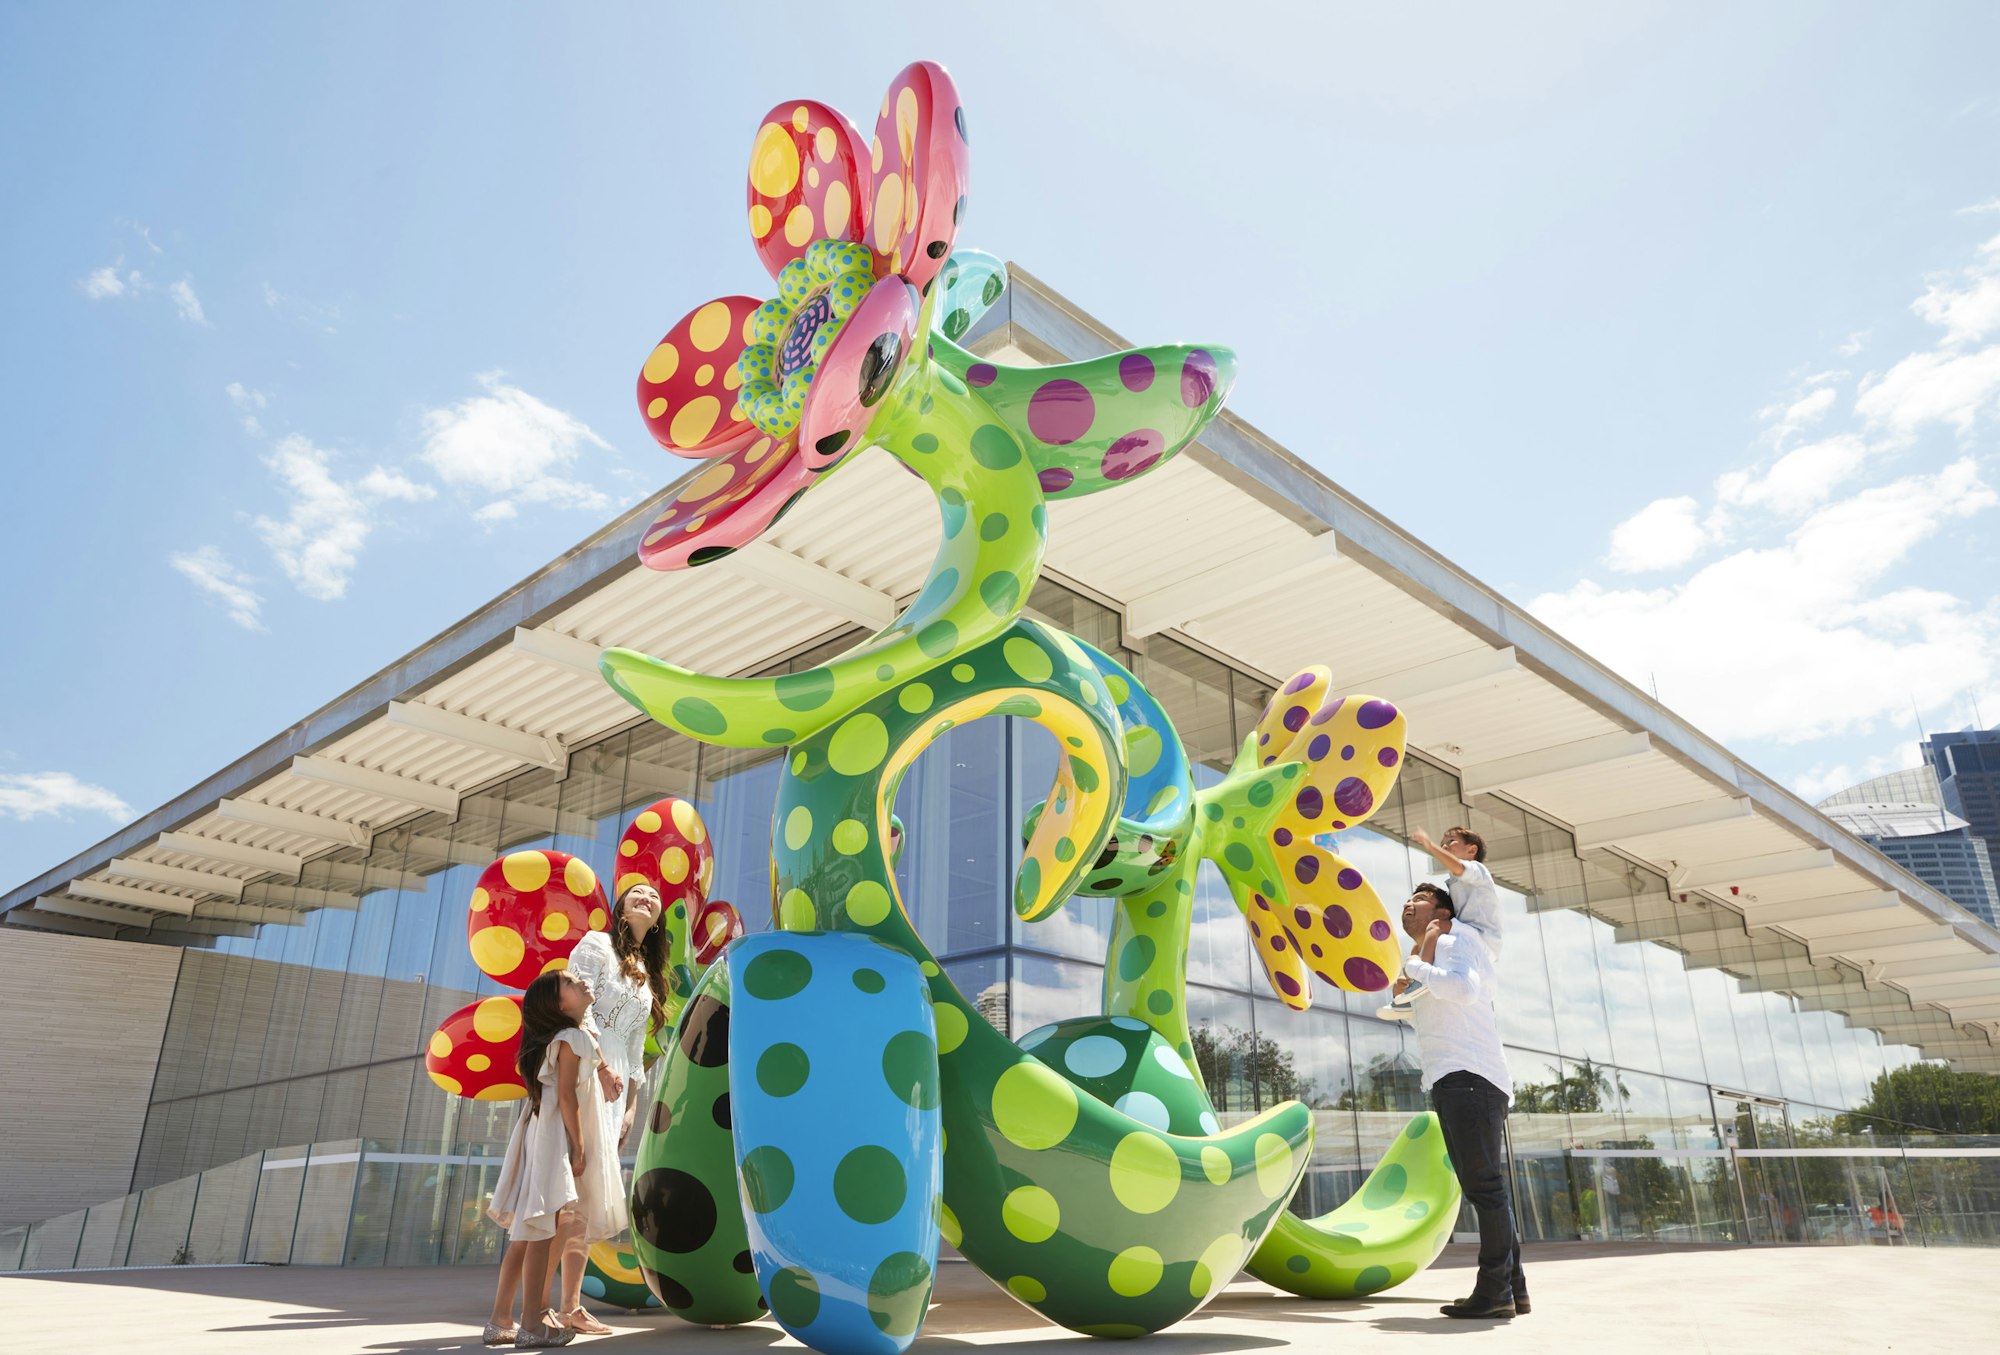 Two adults and two children look at a large sculpture of a colourful, spotted flower in front of a glass building